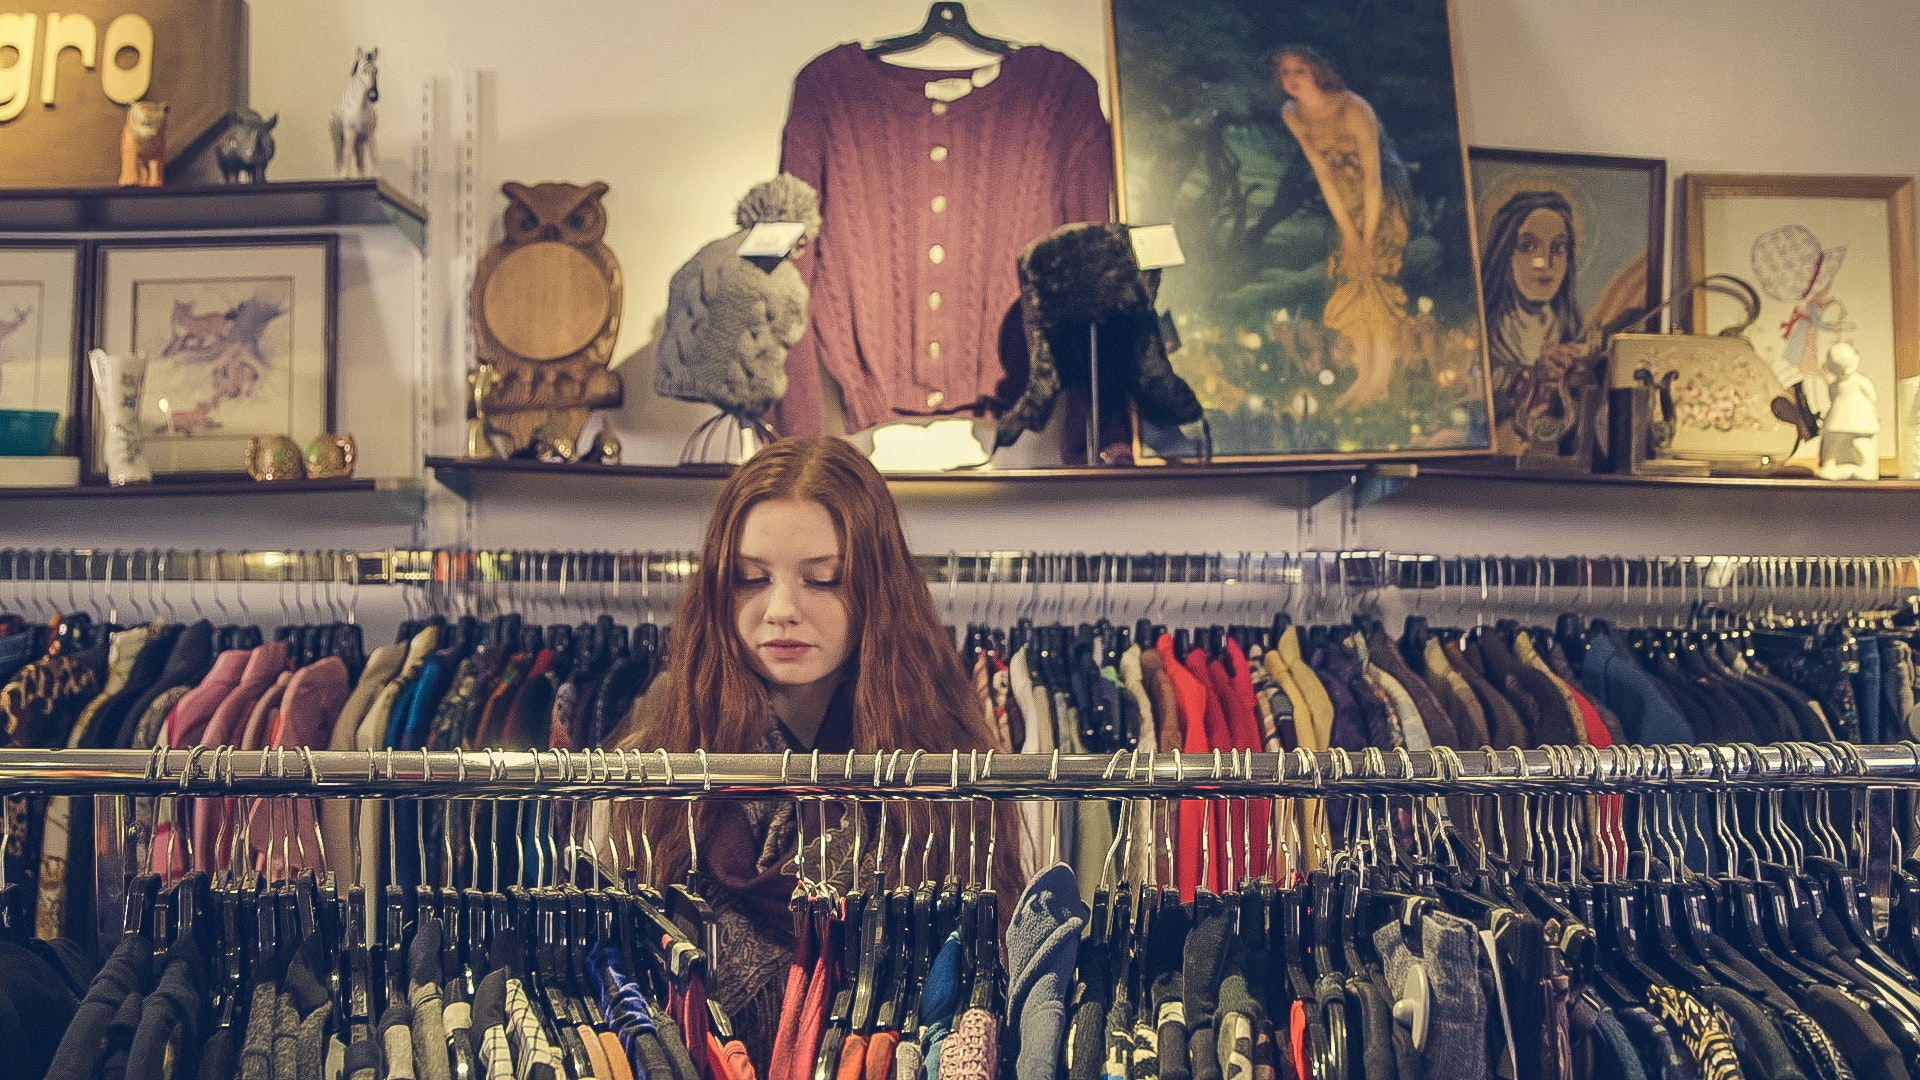 A woman looking at clothes in a clothing store.